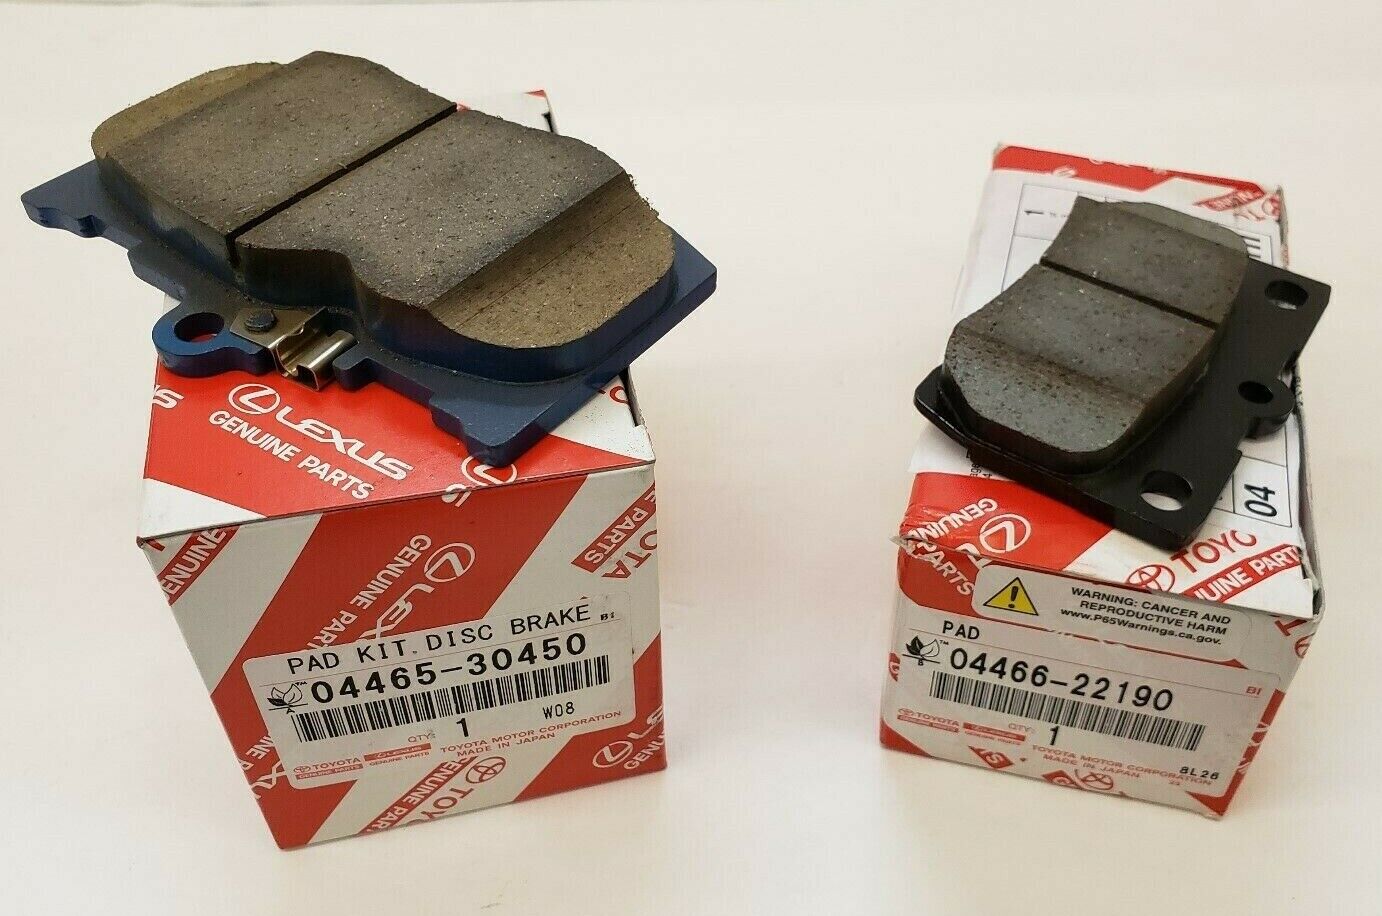 LEXUS OEM FACTORY FRONT AND REAR BRAKE PAD SET 2006-2013 IS350 (LOW DUST FRONTS)